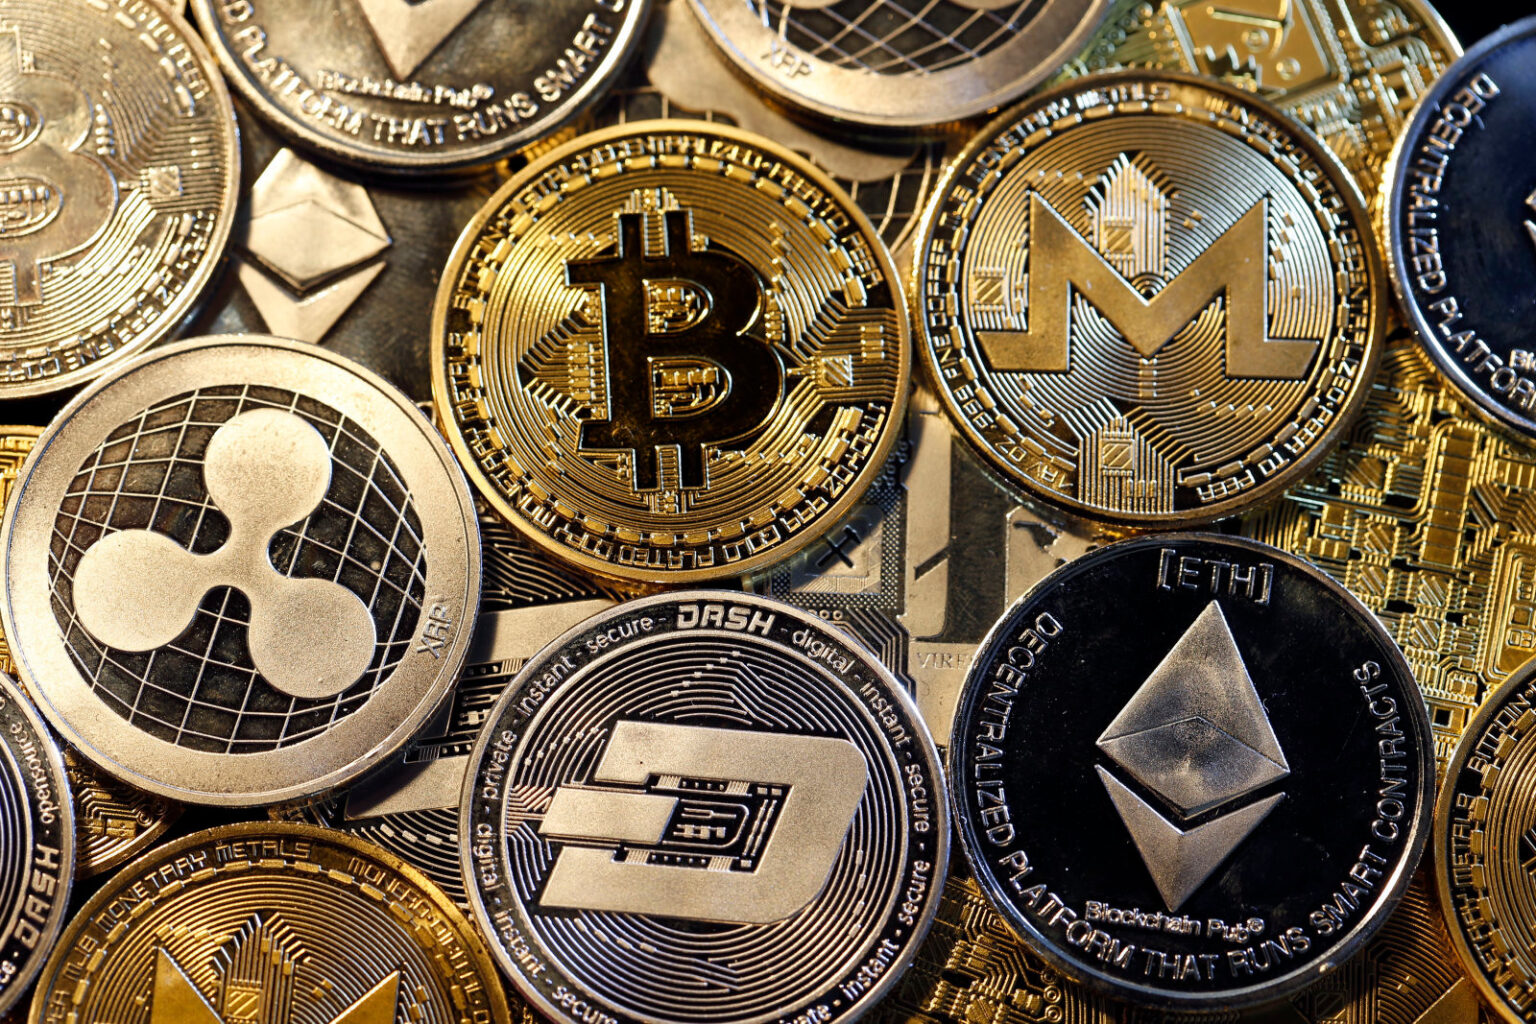 Don’t want to put all your investment eggs in the Bitcoin basket? Cash in with these other types of cryptocurrencies.